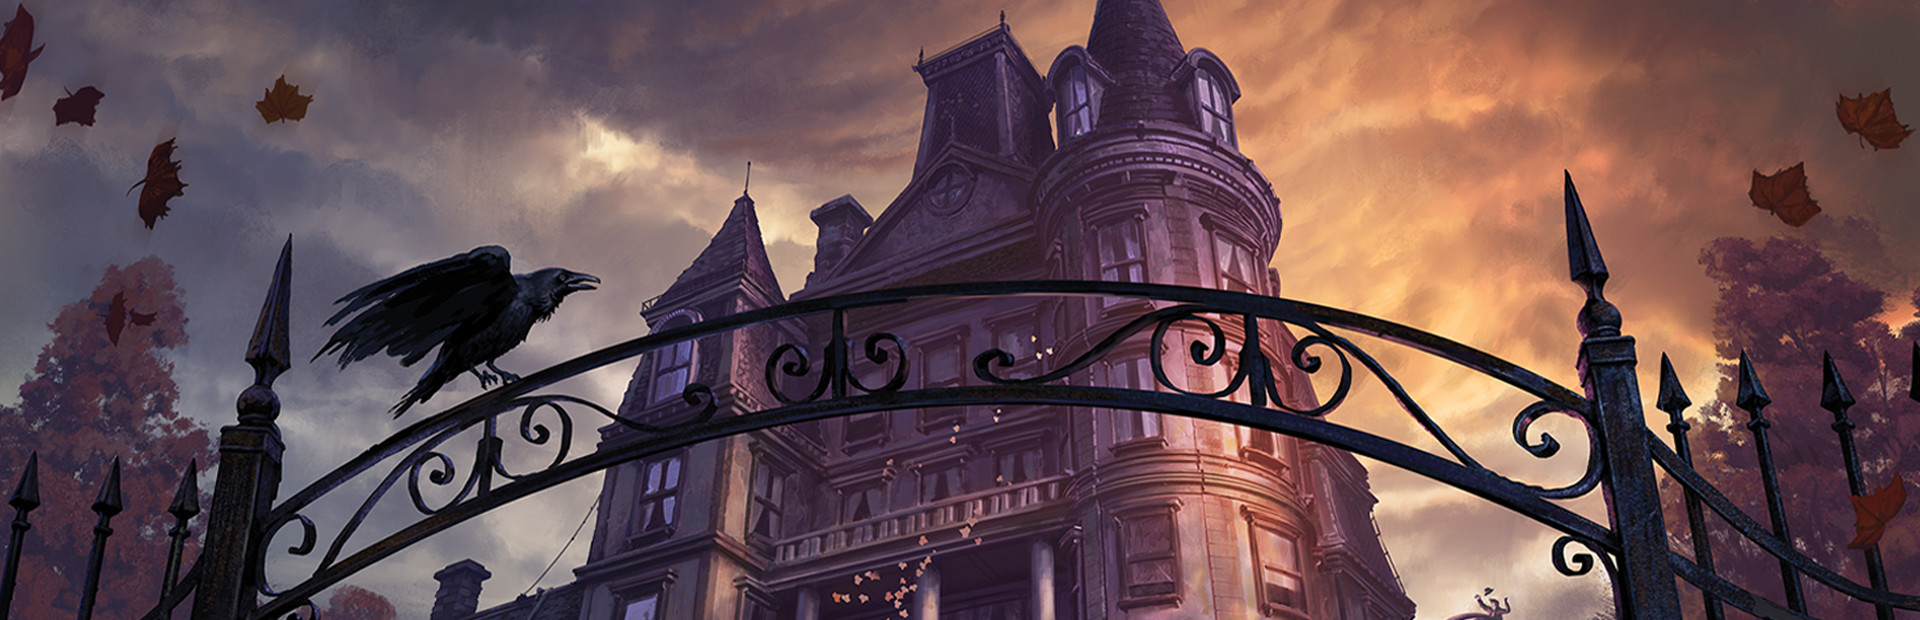 Steam mansions of madness фото 16